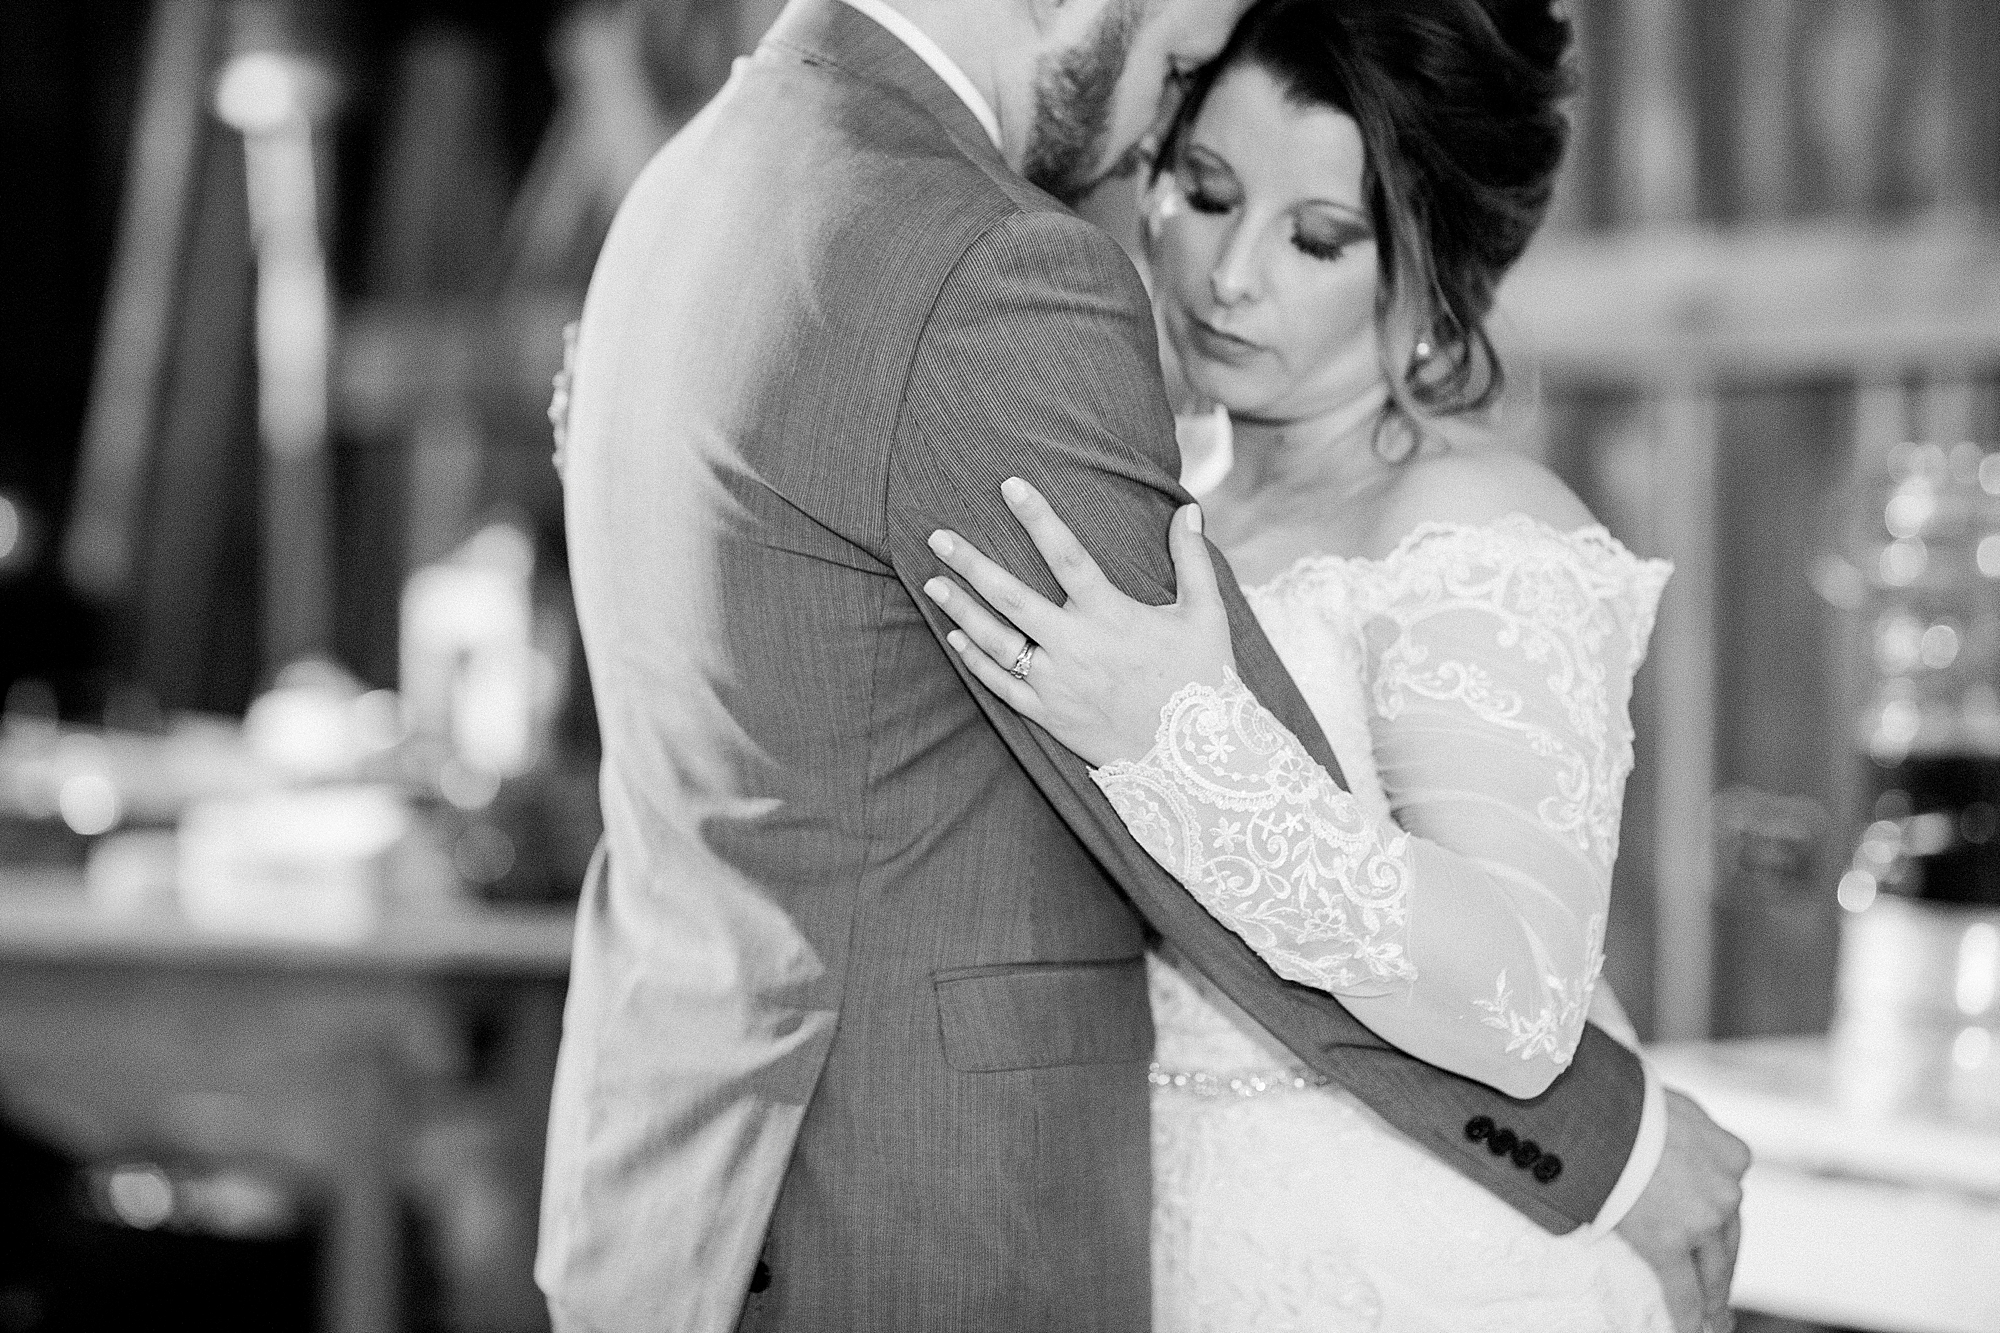 photo of a husband and wife's first dance at their wedding in black and white photographed by j. photography, a wedding photographer in Clarksville, TN